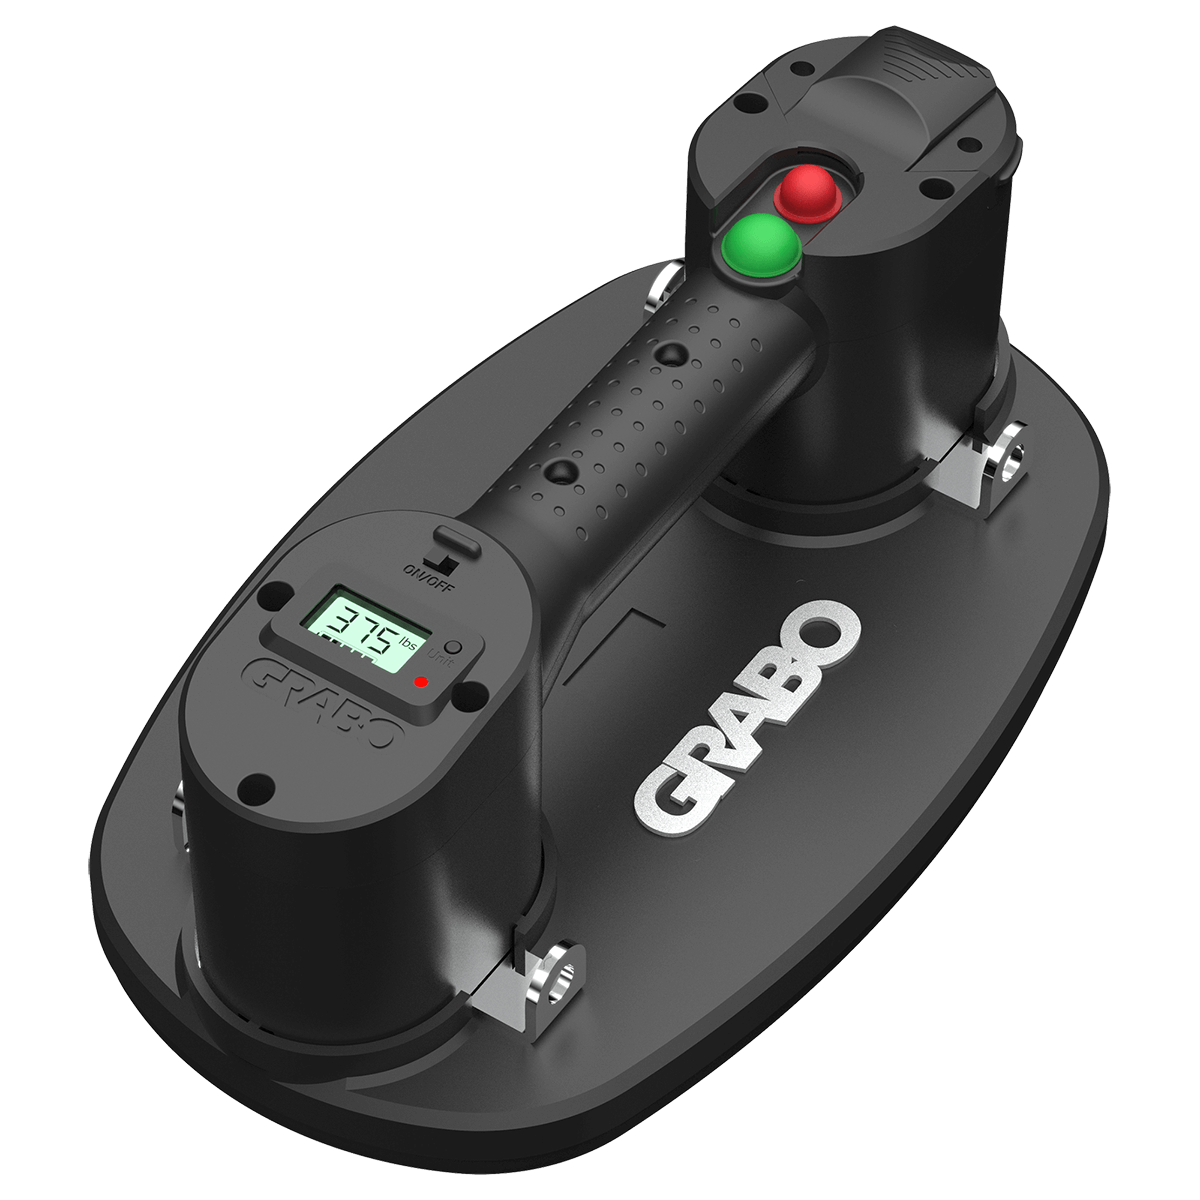 Grabo battery operated vacuum cup - GRABO PRO-Lifter 20